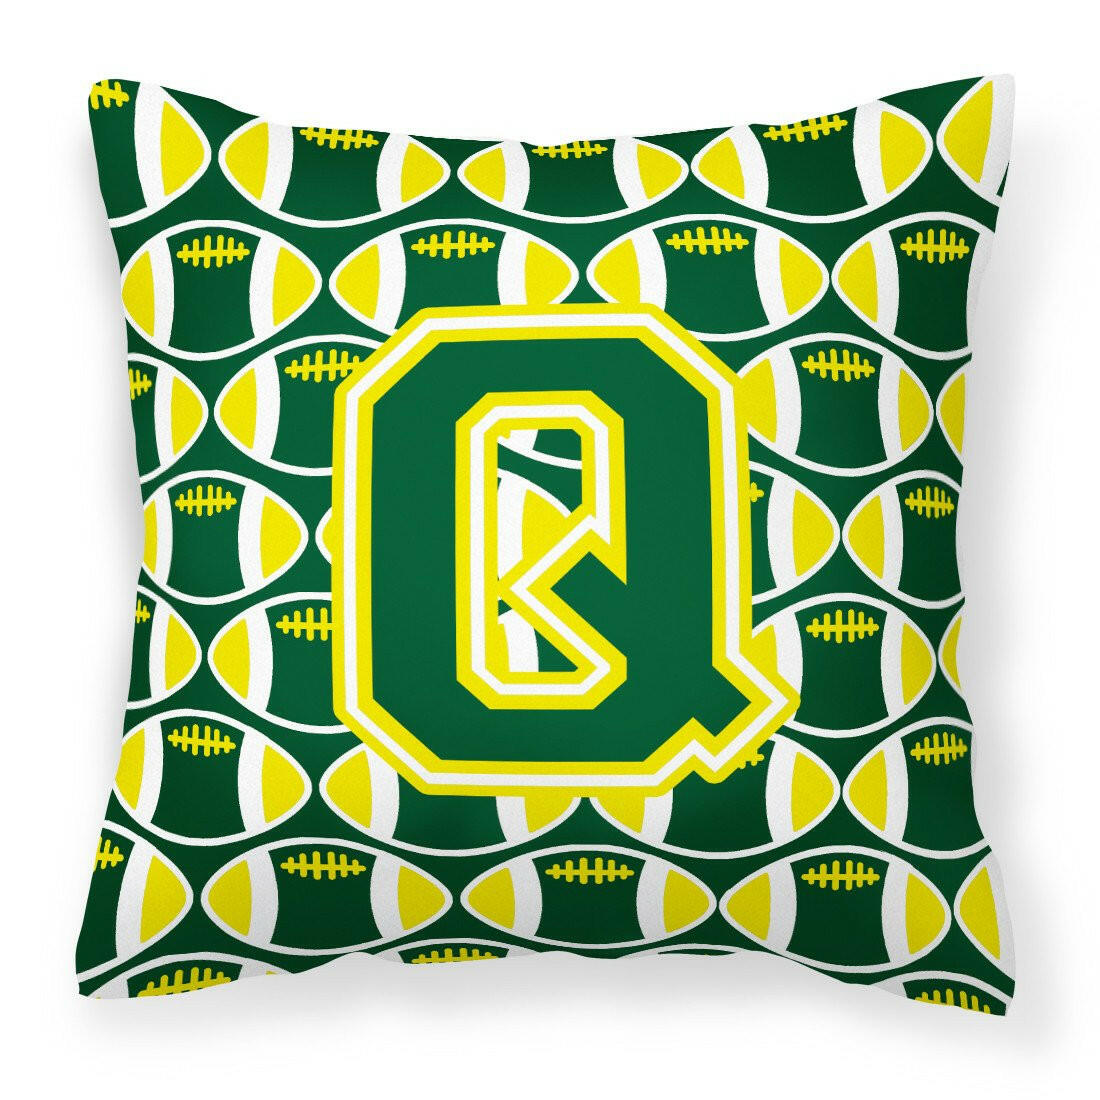 Letter Q Football Green and Yellow Fabric Decorative Pillow CJ1075-QPW1414 by Caroline's Treasures